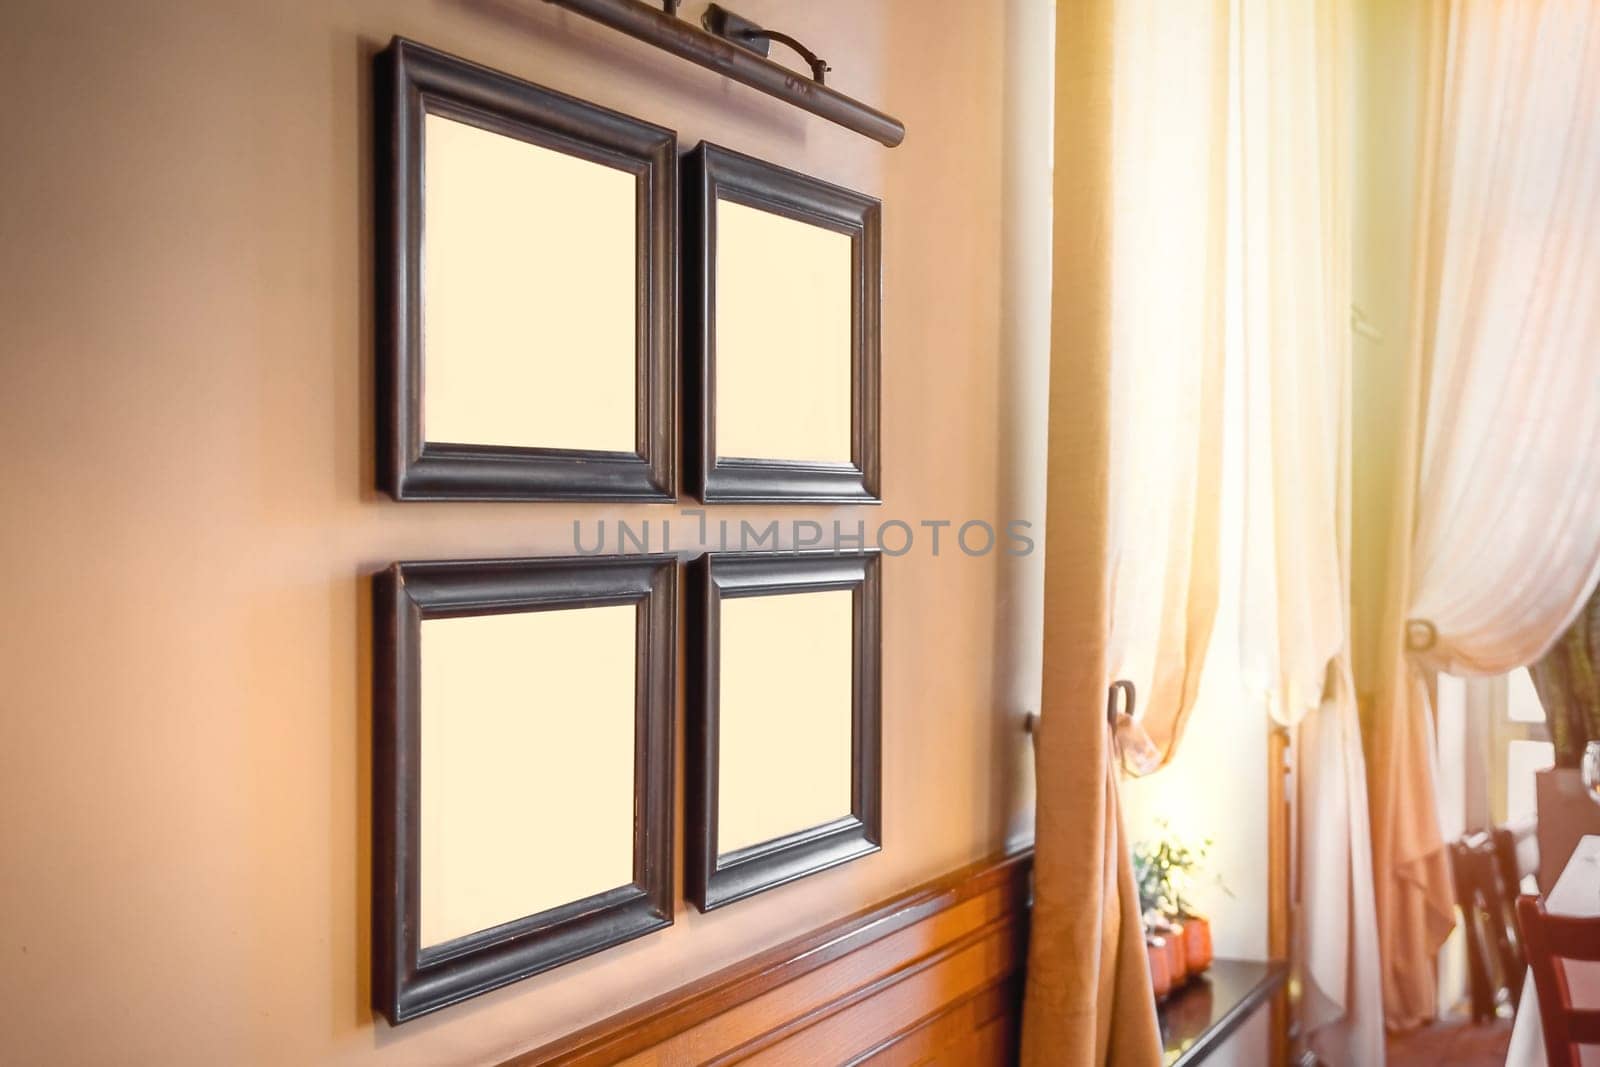 Template with 4 frames for paintings or photographs in the interior next to the window on a sunny day by Rom4ek